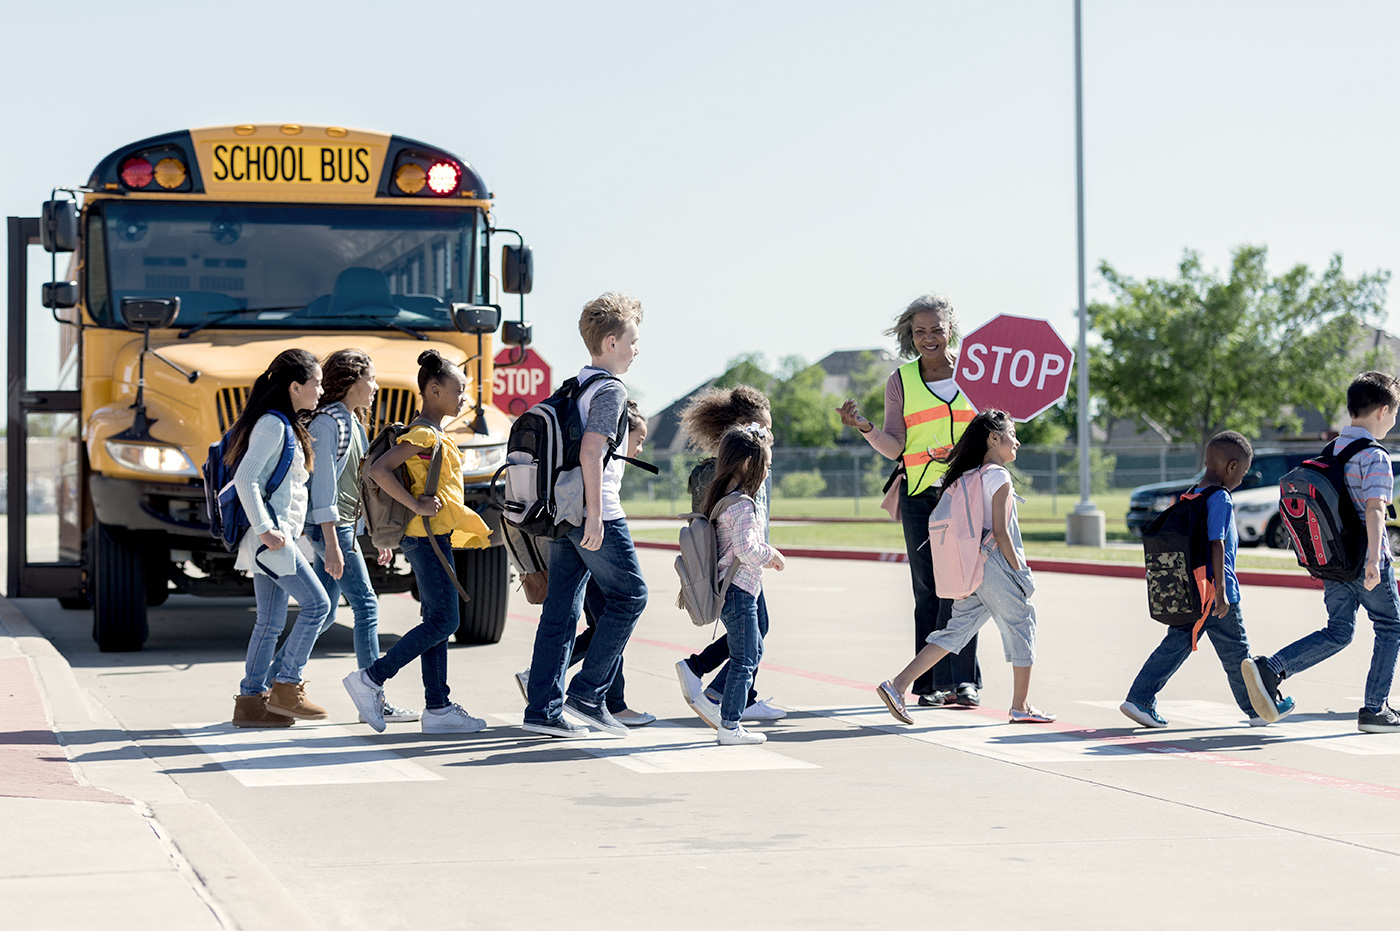 Children crossing the street with a crossing guard in front of a school bus.